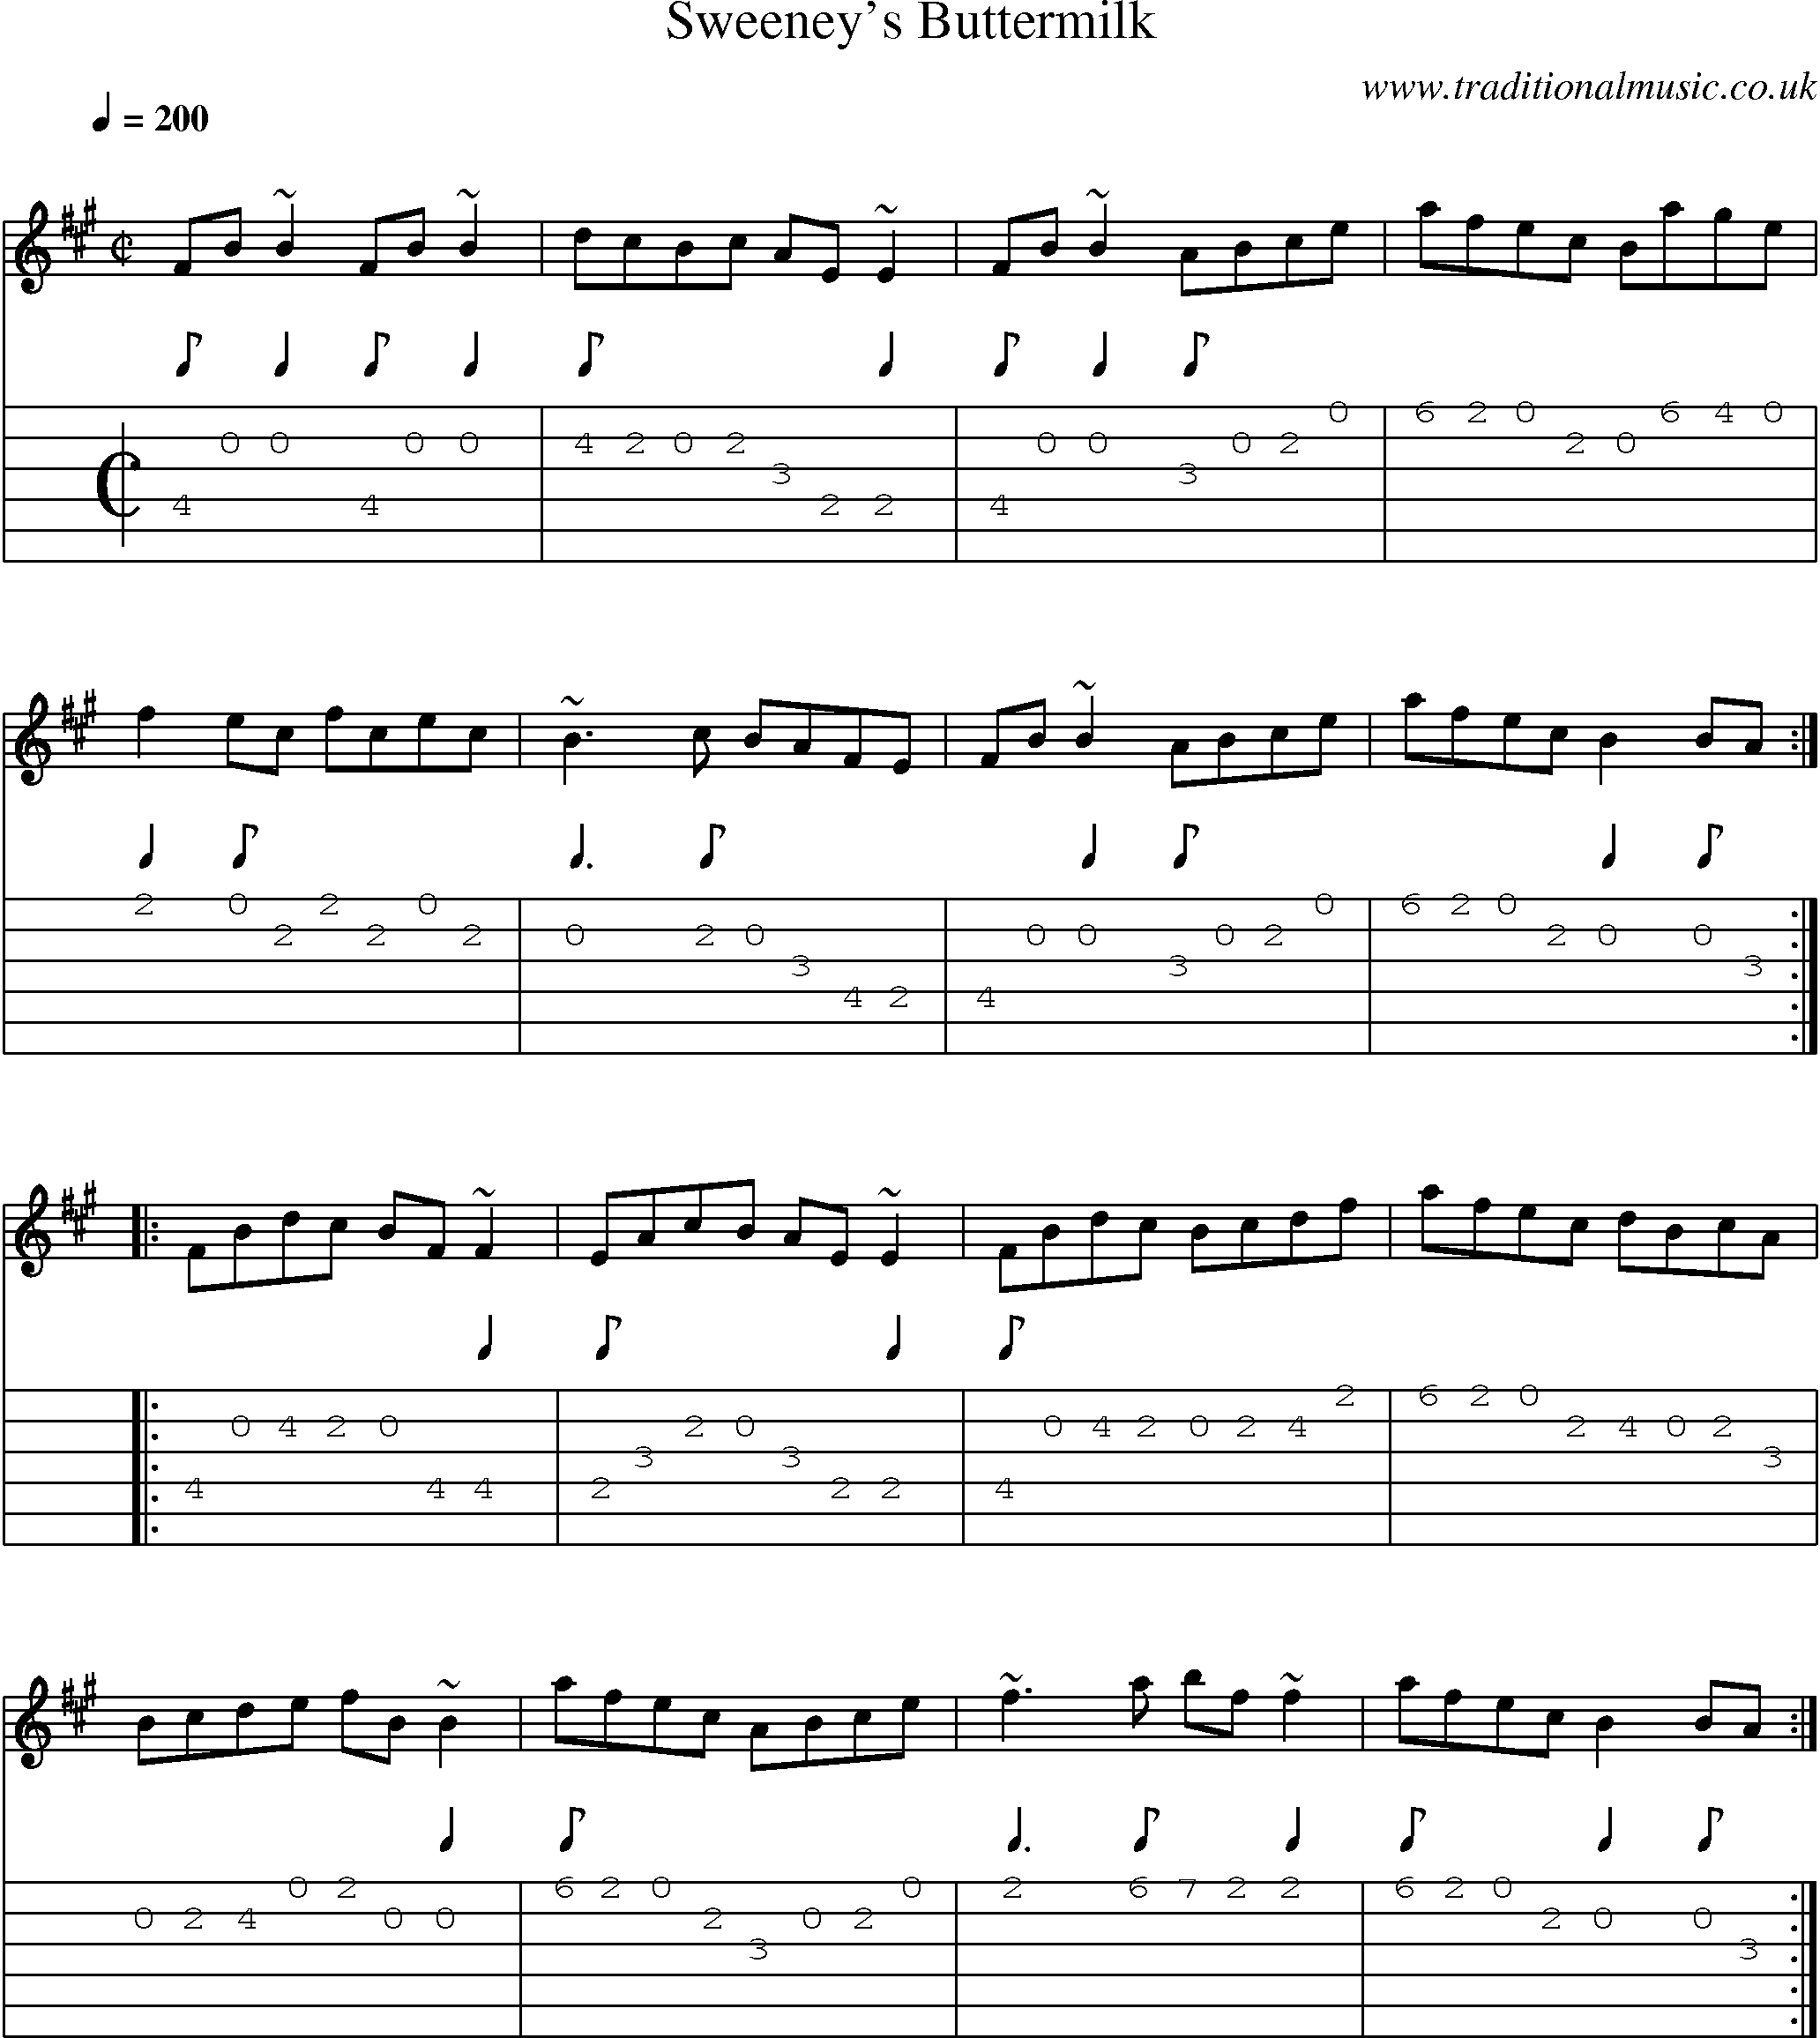 Music Score and Guitar Tabs for Sweeneys Buttermilk